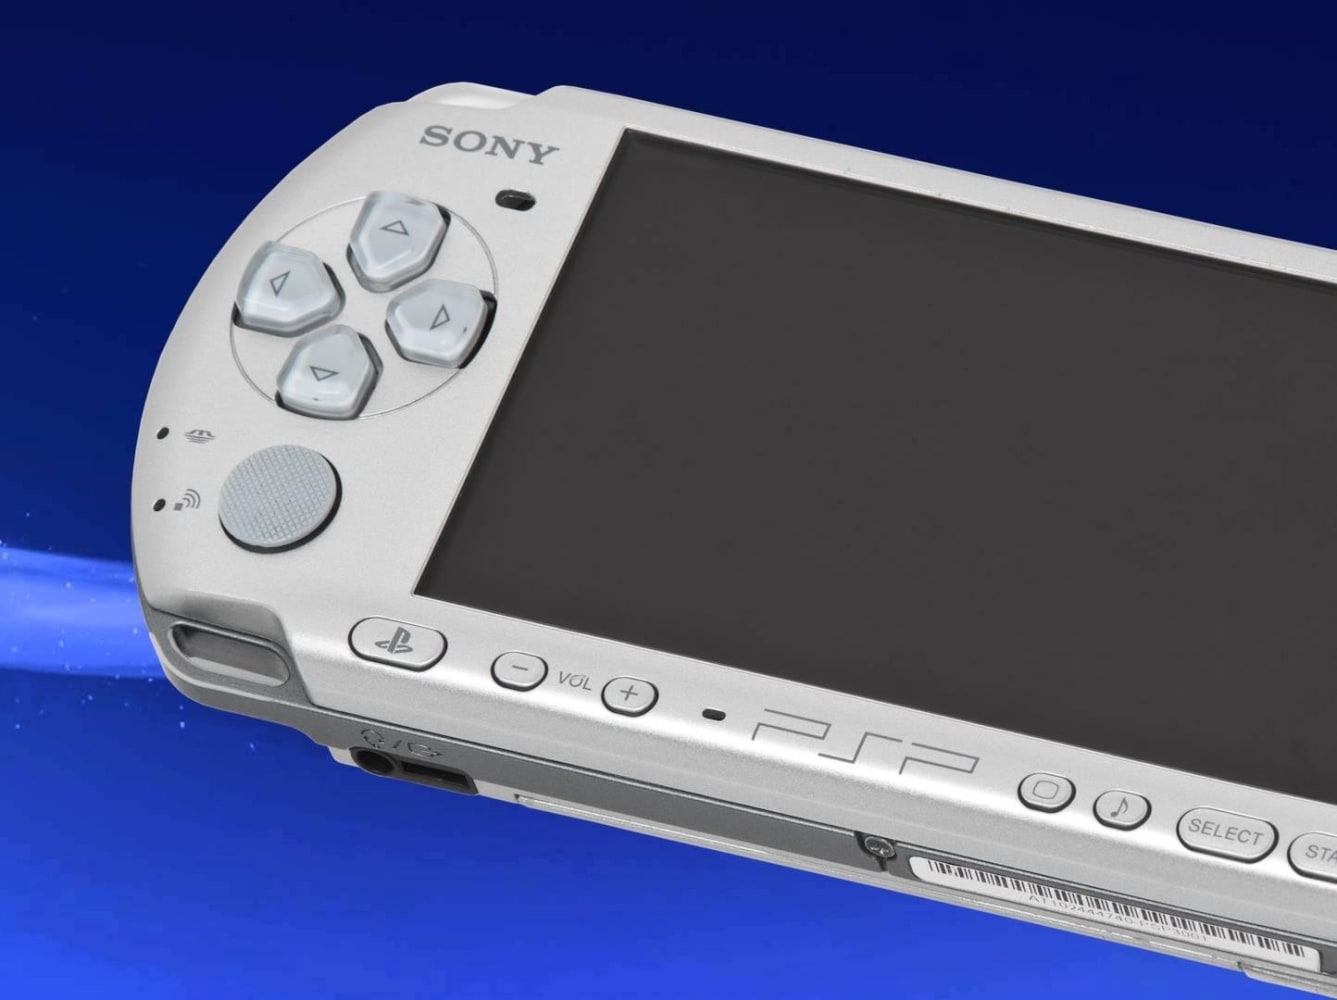 Sony PSP: 10 games you need to play